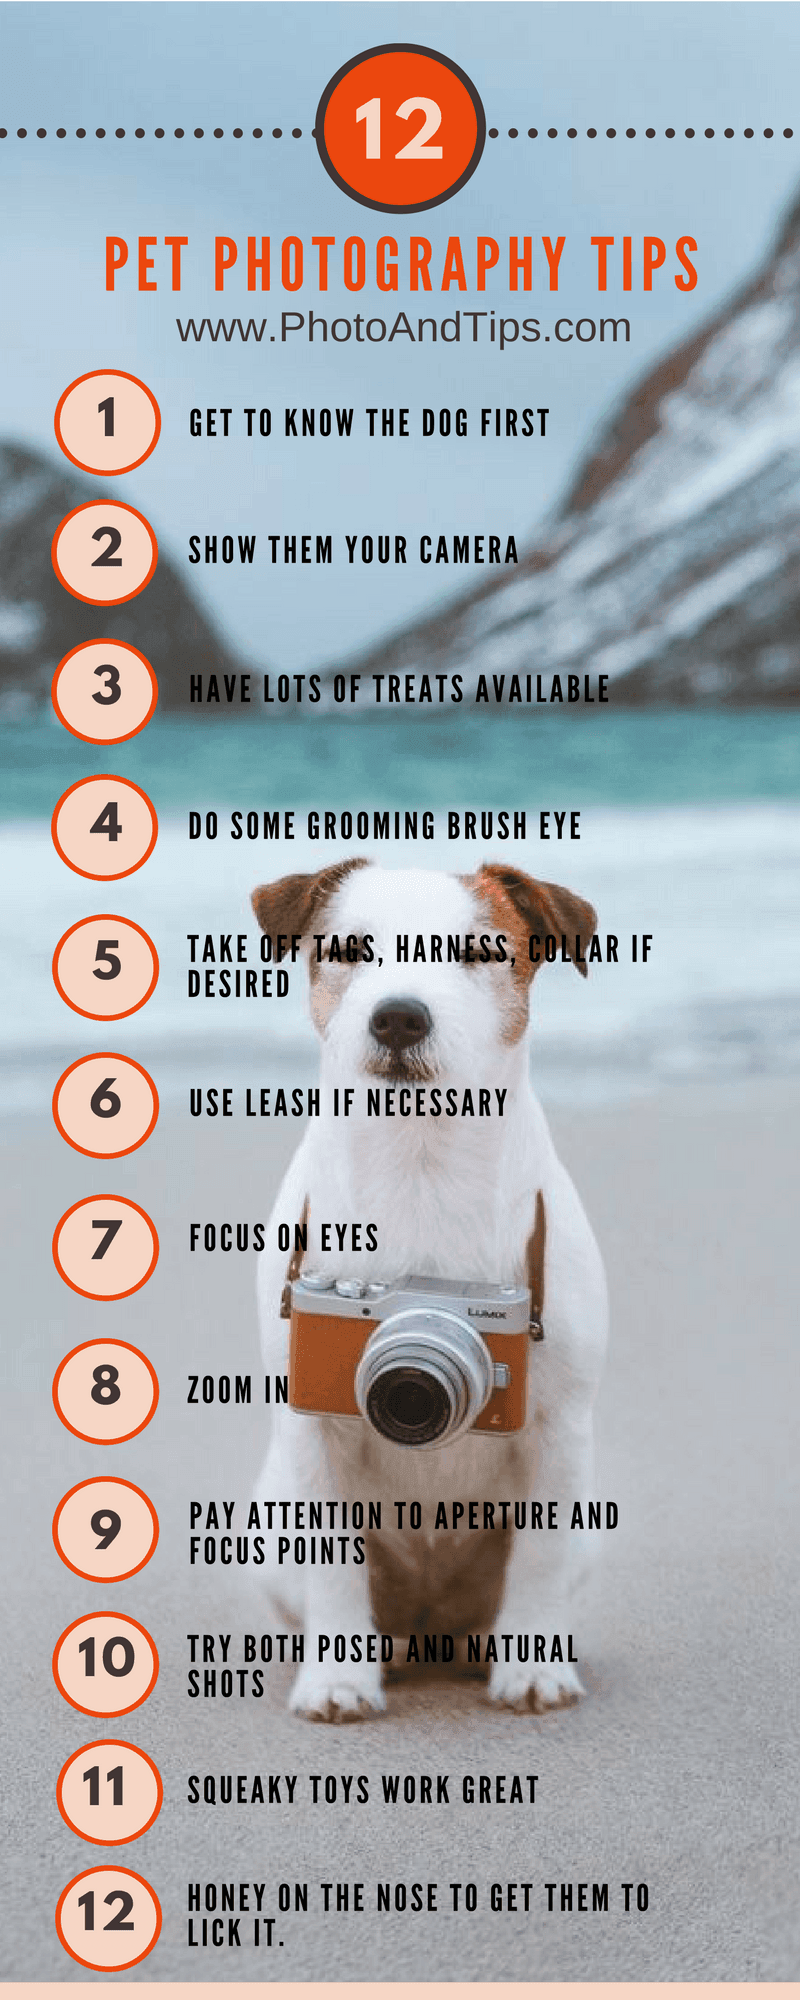 12_Pet_Photography_Tips